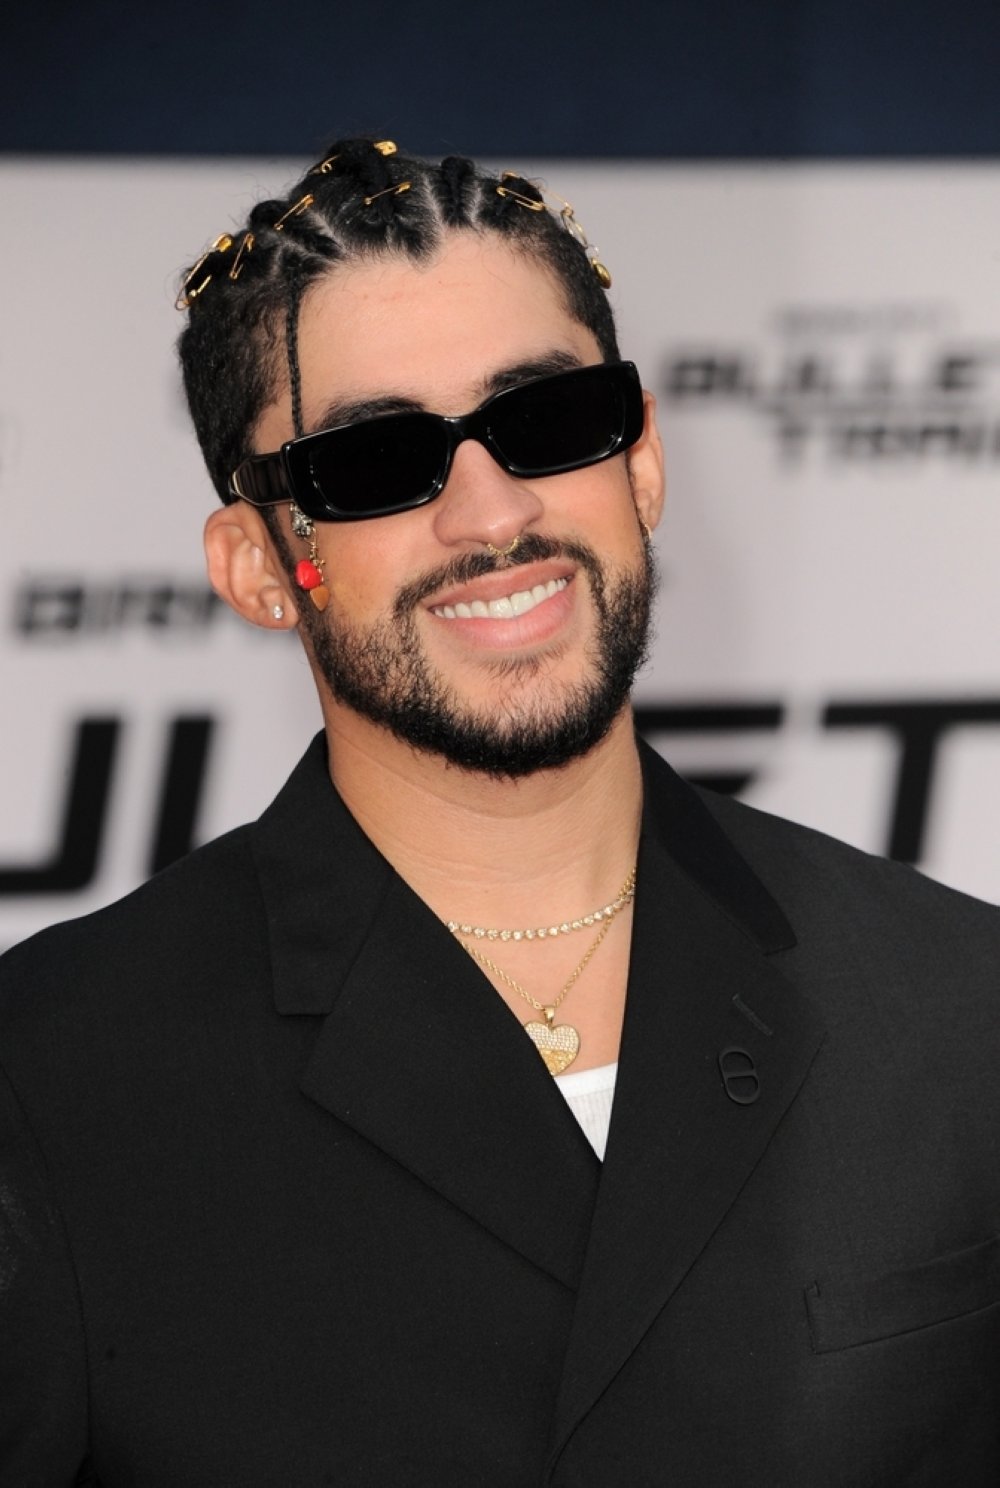 Bad Bunny at the Los Angeles premiere of &quot;Bullet Train&quot; held at the Regency Village Theatre in Westwood, Los Angeles, California, U.S., Aug. 1, 2022. (Shutterstock Photo)